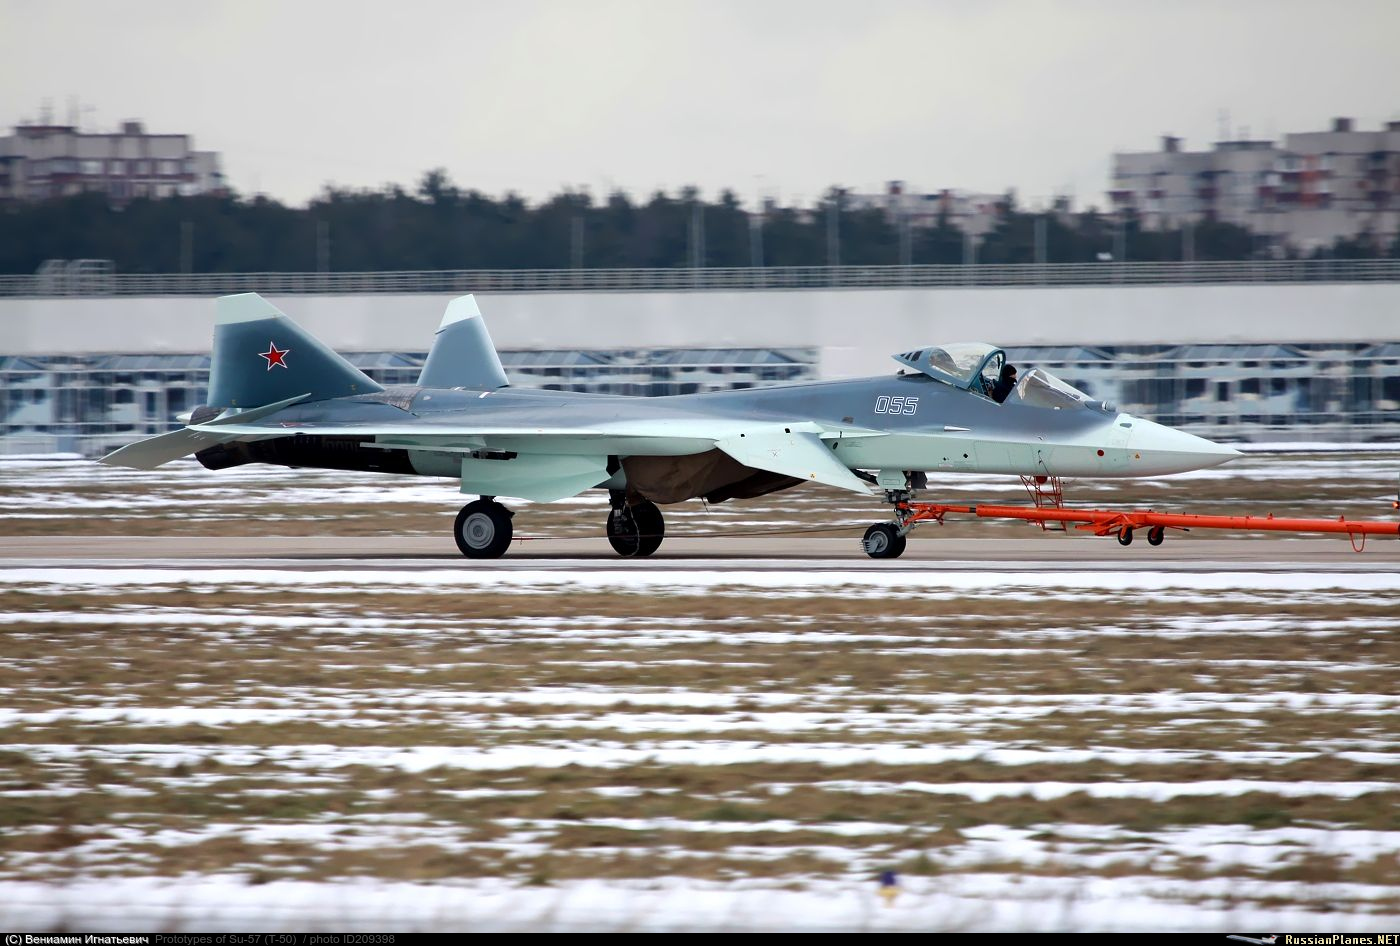 http://russianplanes.net/images/to210000/209398.jpg